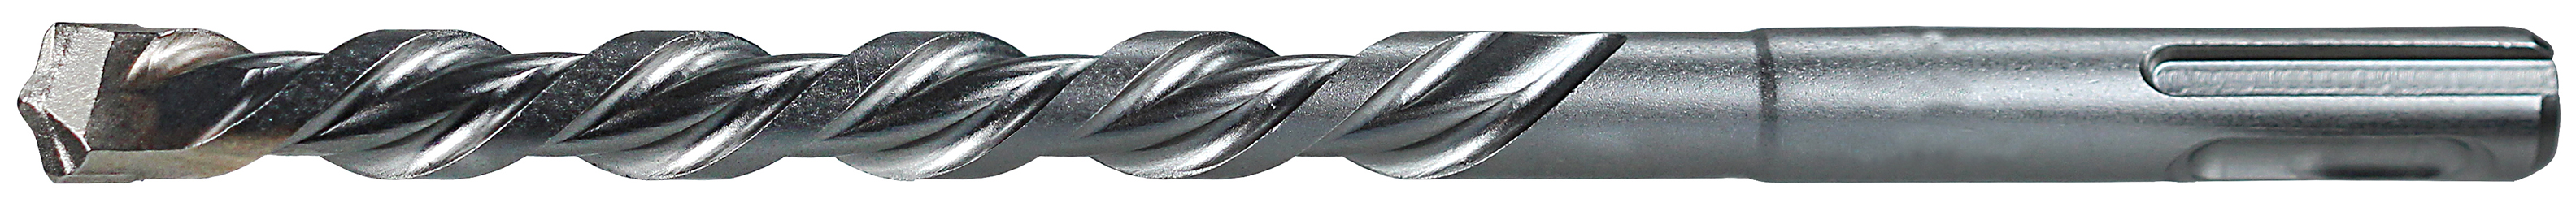 Rotary Hammer Drill Bit, 7/32 in. bit diameter, 6-1/4 in. overall length, Straight shank type, 3 flutes, Tip-Carbide material, 4 in. drilling depth